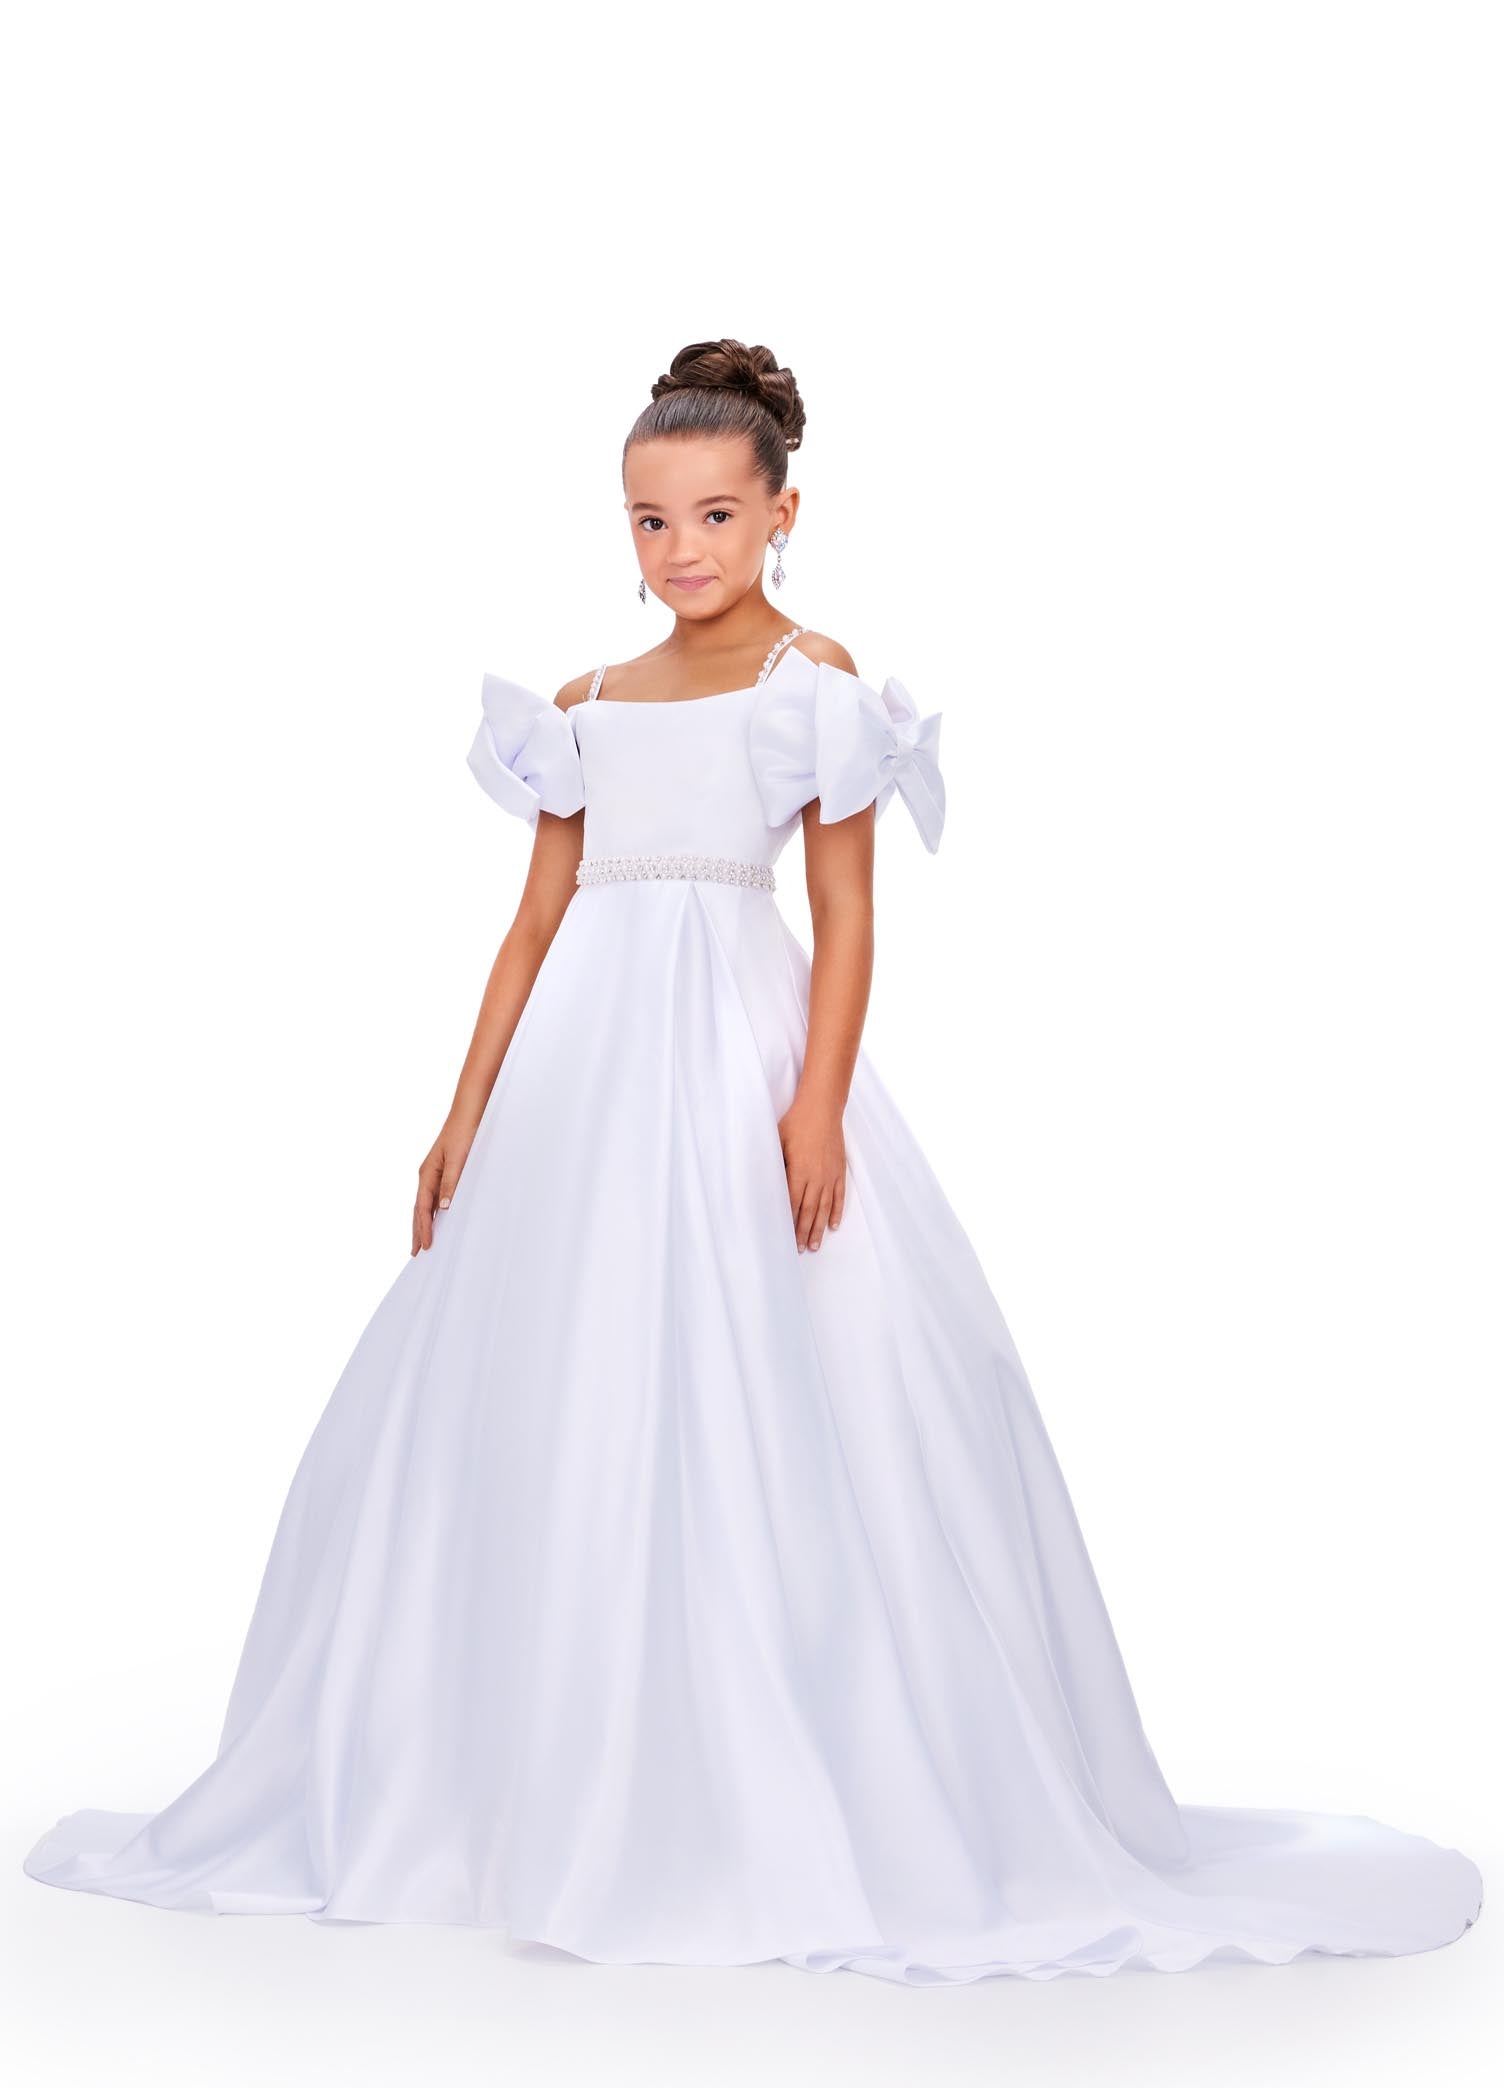 Ashley Lauren Kids 8237 Off the Shoulder Satin Ball Gown Pageant Dress Bows A Line Girls Feel like a princess in this satin ball gown. This gown features off the shoulder bows and pearl accents on the straps and belt.  COLORS: Aqua, Pink, White, Lilac Sizes: 2-16 Off Shoulder Beaded Accents Ball Gown Satin